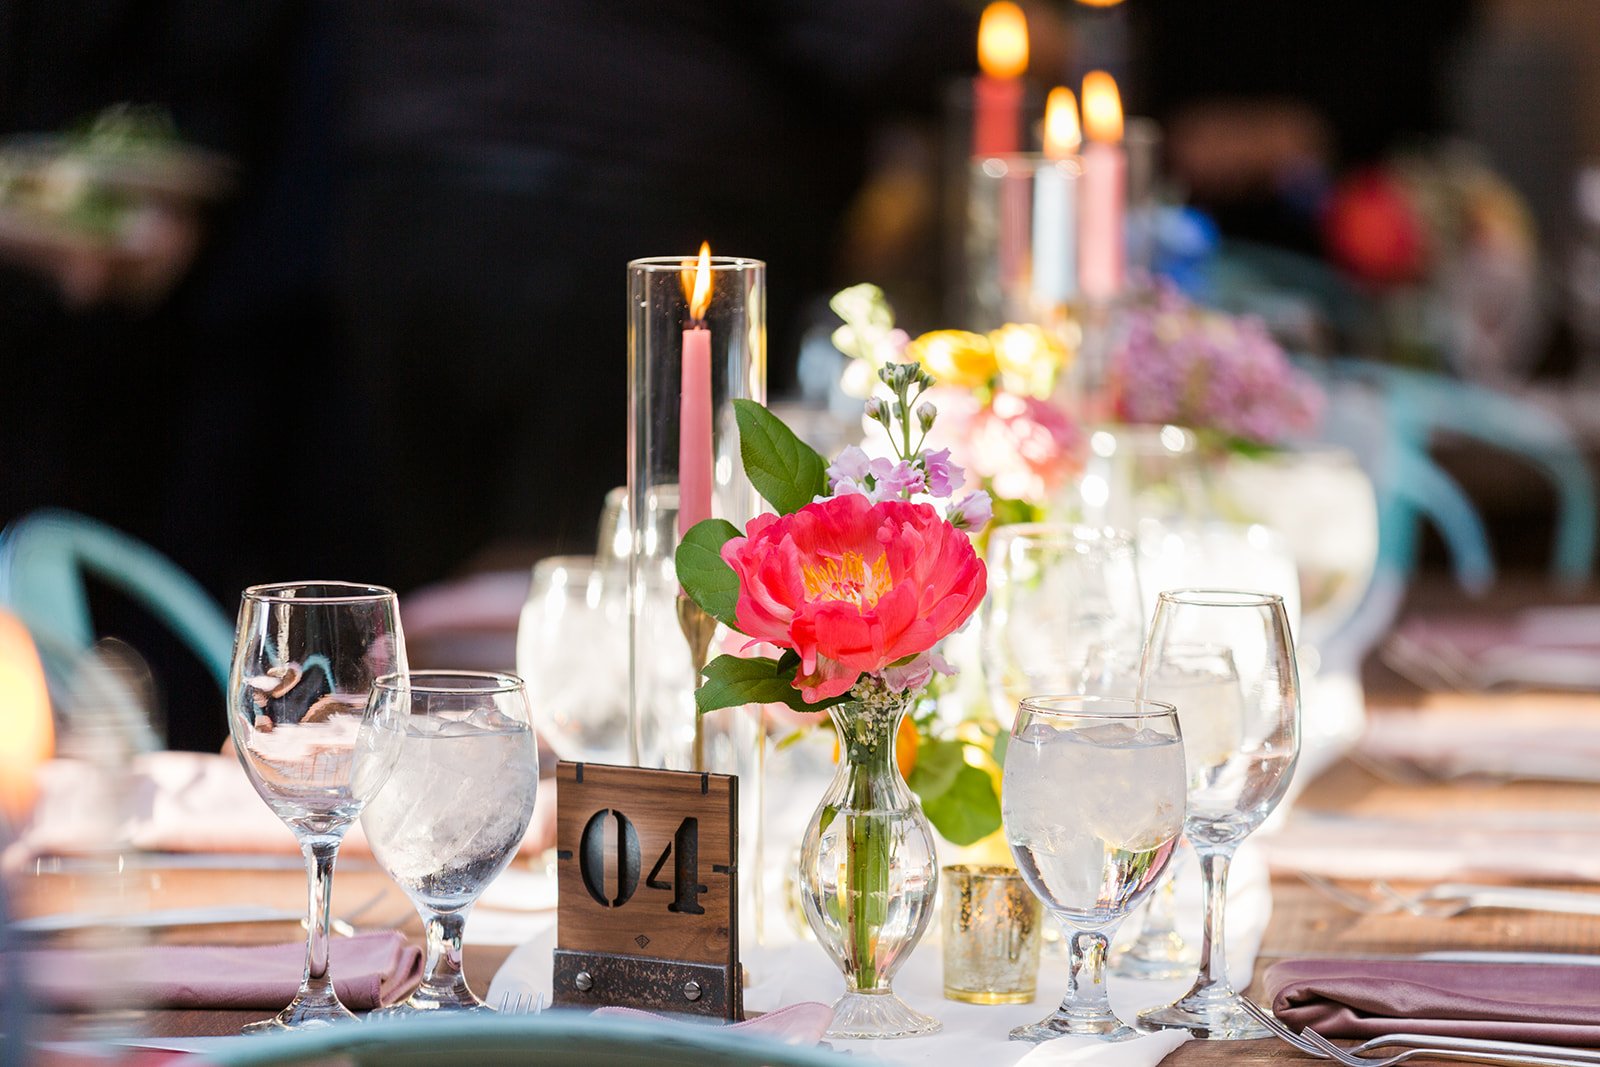  Documentary detail of wedding table decor with bright florals, tall colorful candles and airy white linens at nontraditional Jewish and Venezuelan wedding  at The Joinery Chicago an Industrial loft wedding venue In Logan Square. Great wedding decor 